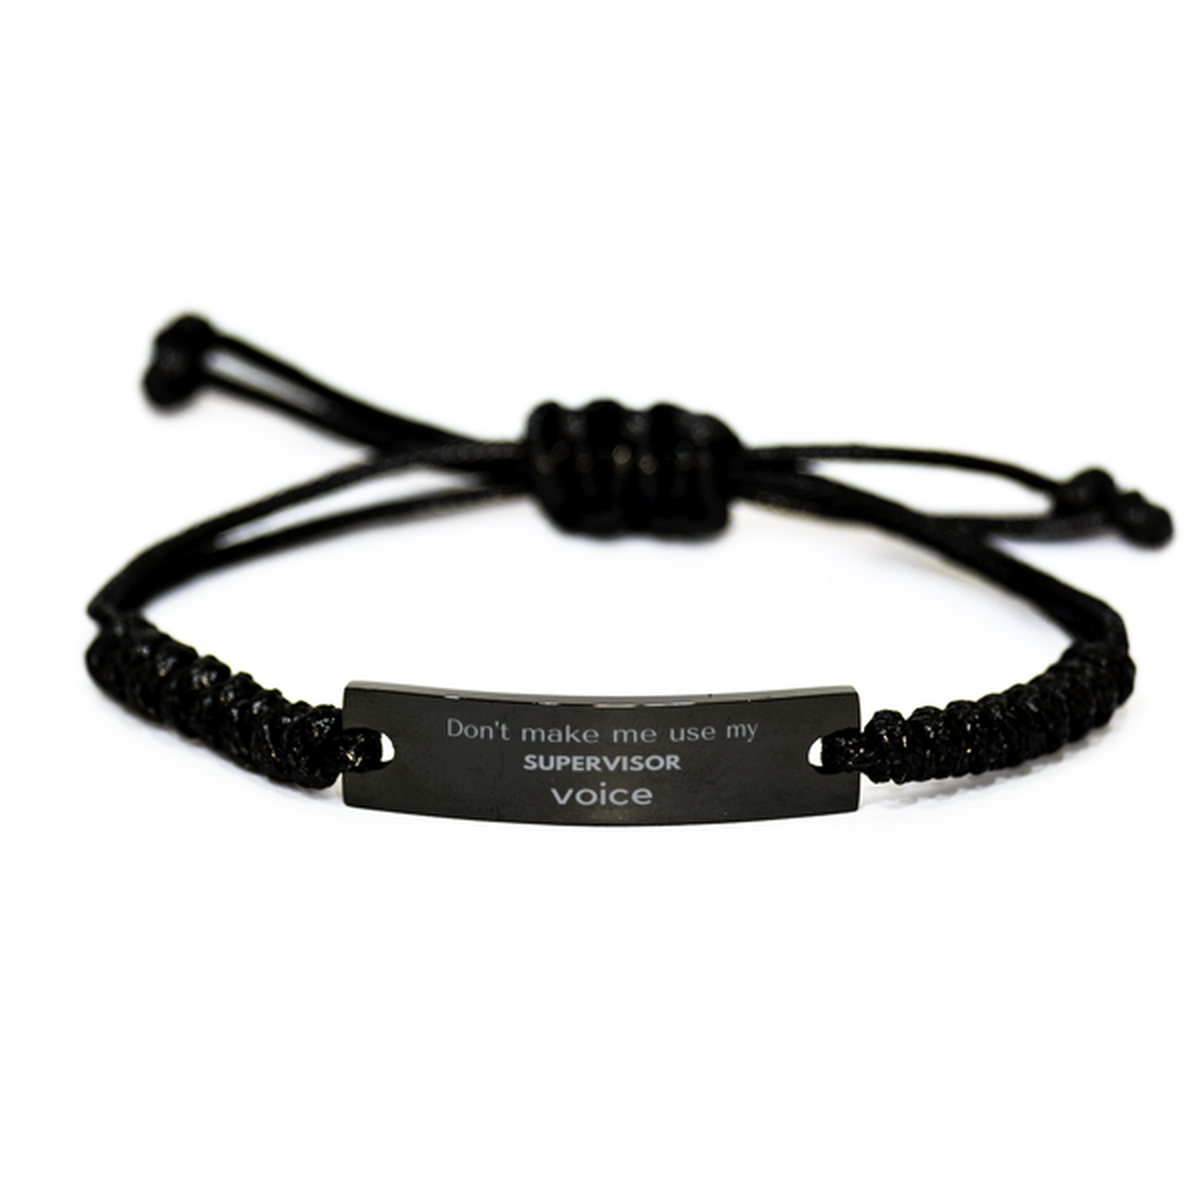 Don't make me use my Supervisor voice, Sarcasm Supervisor Gifts, Christmas Supervisor Black Rope Bracelet Birthday Unique Gifts For Supervisor Coworkers, Men, Women, Colleague, Friends